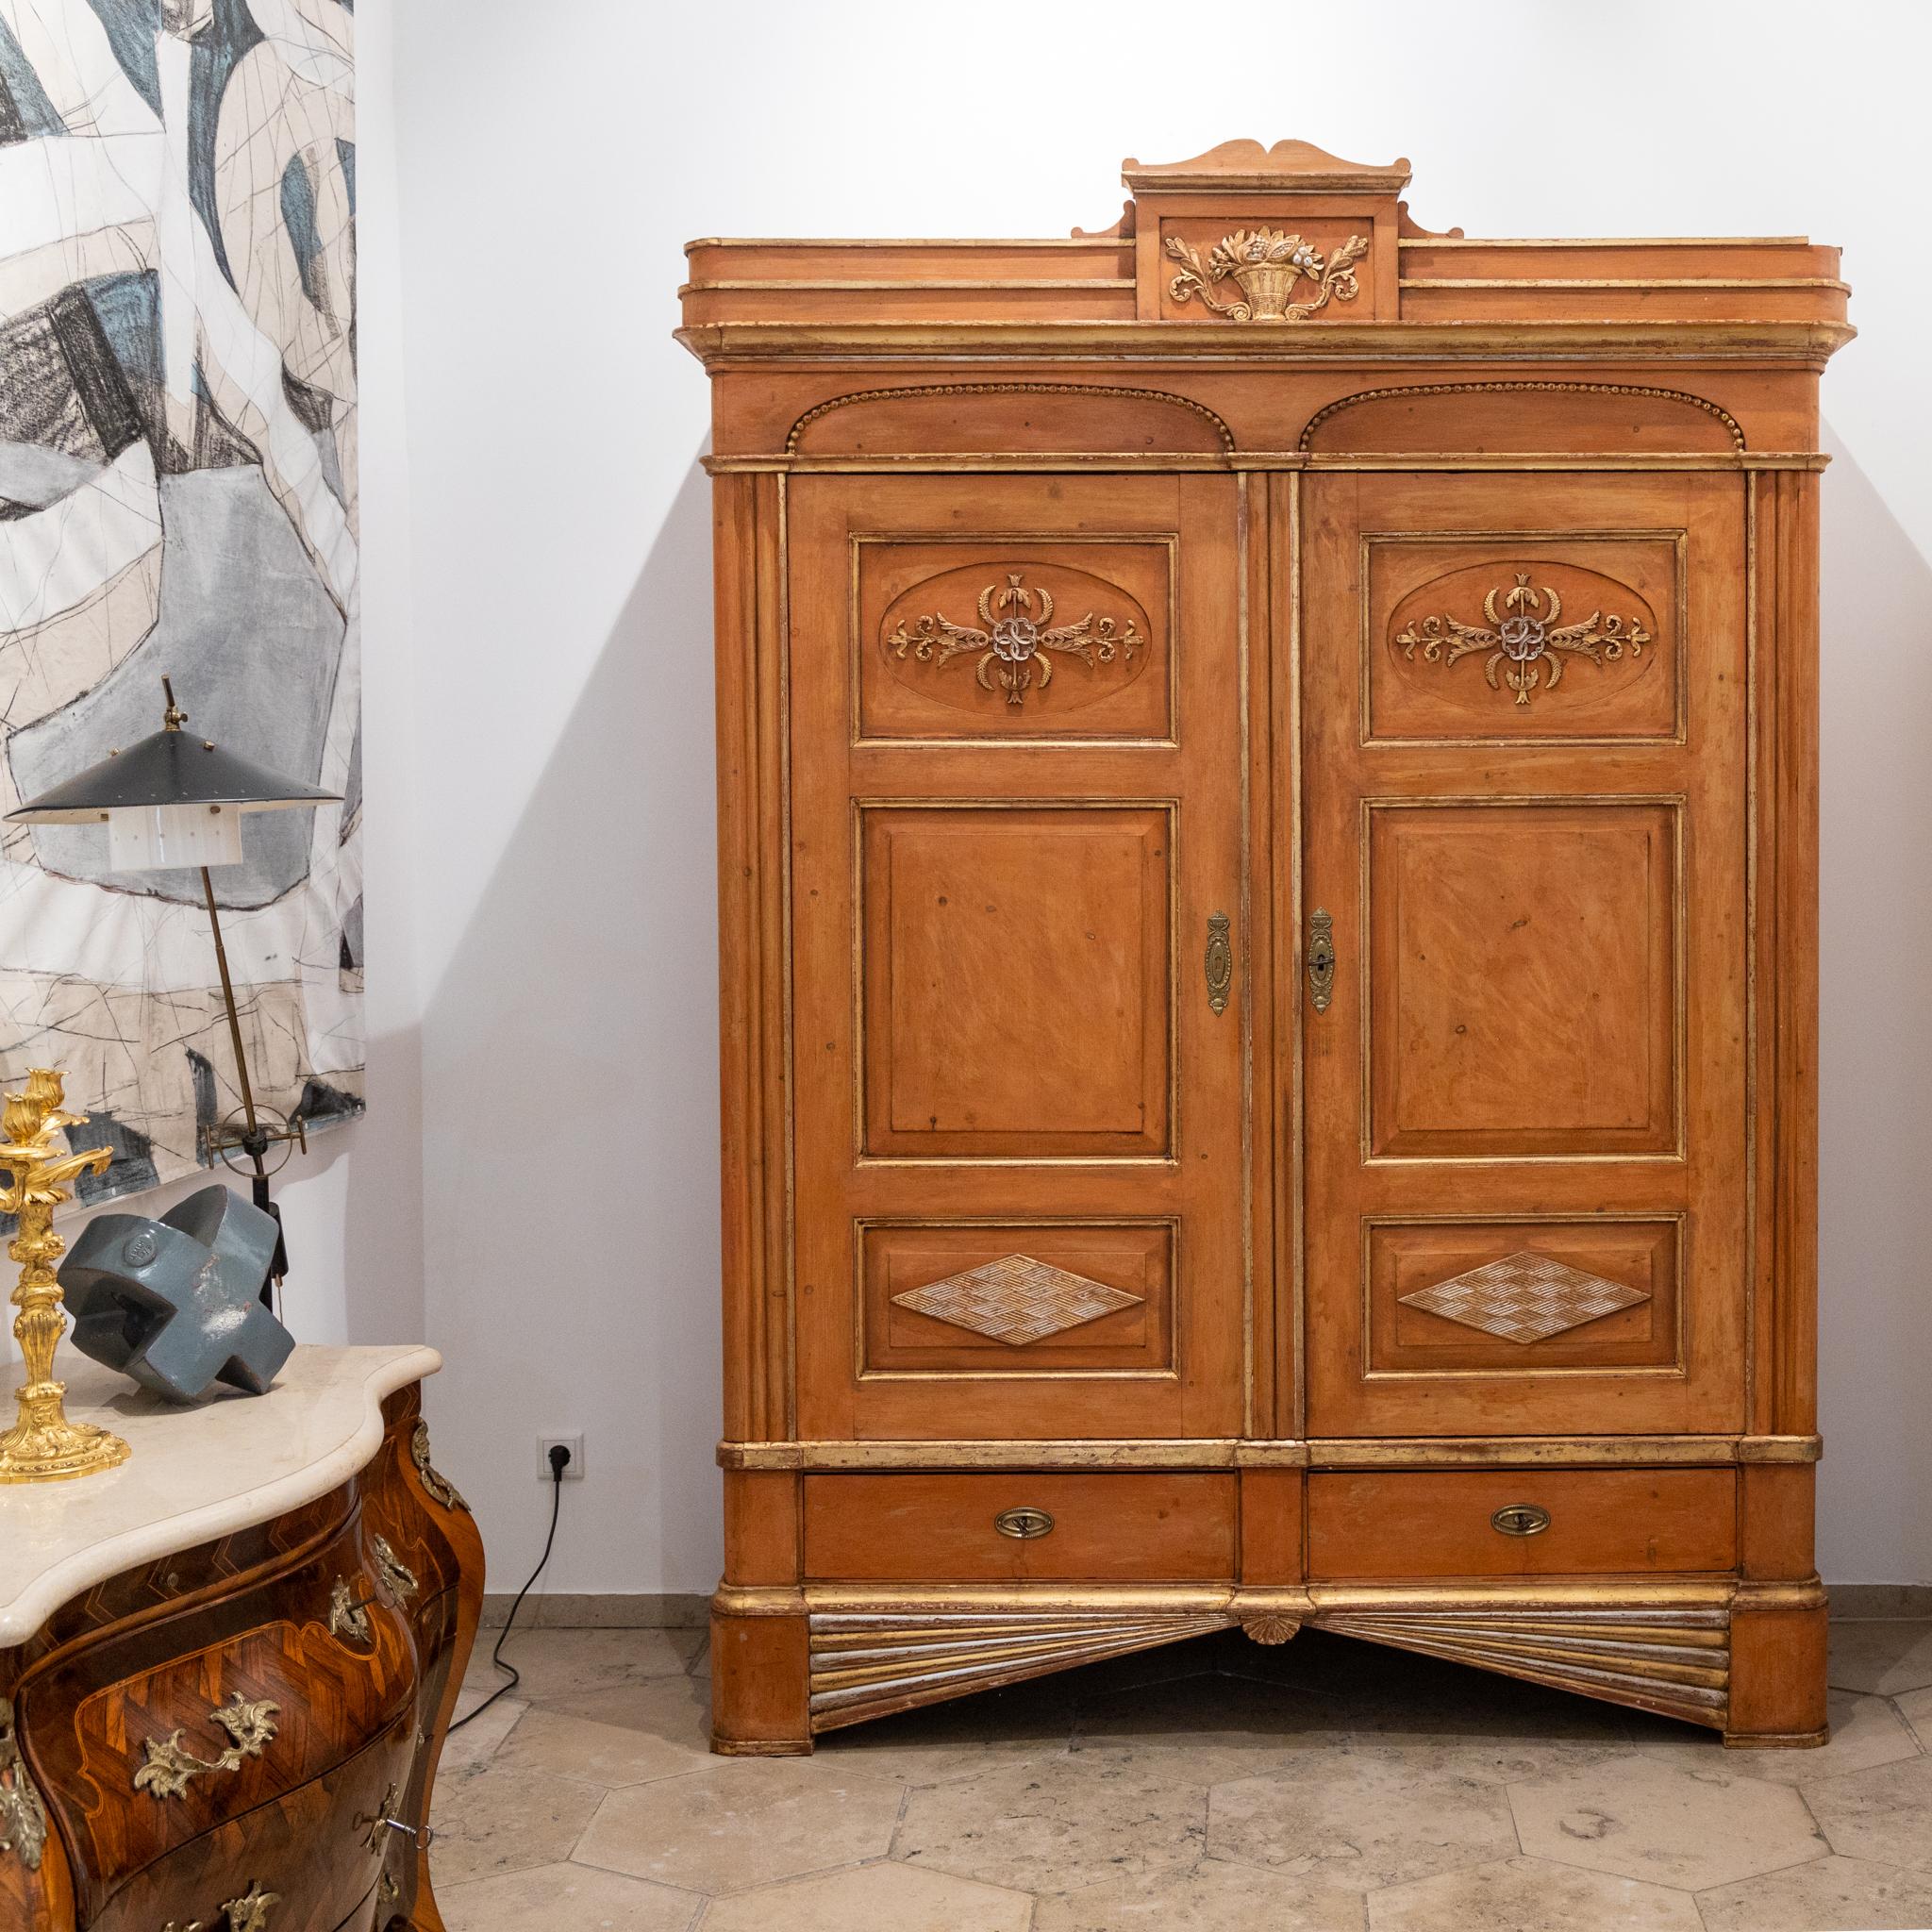 Large beveled cabinet with two doors and two drawers and gold and silver patinated stucco decorations in the form of vines and fruit baskets.